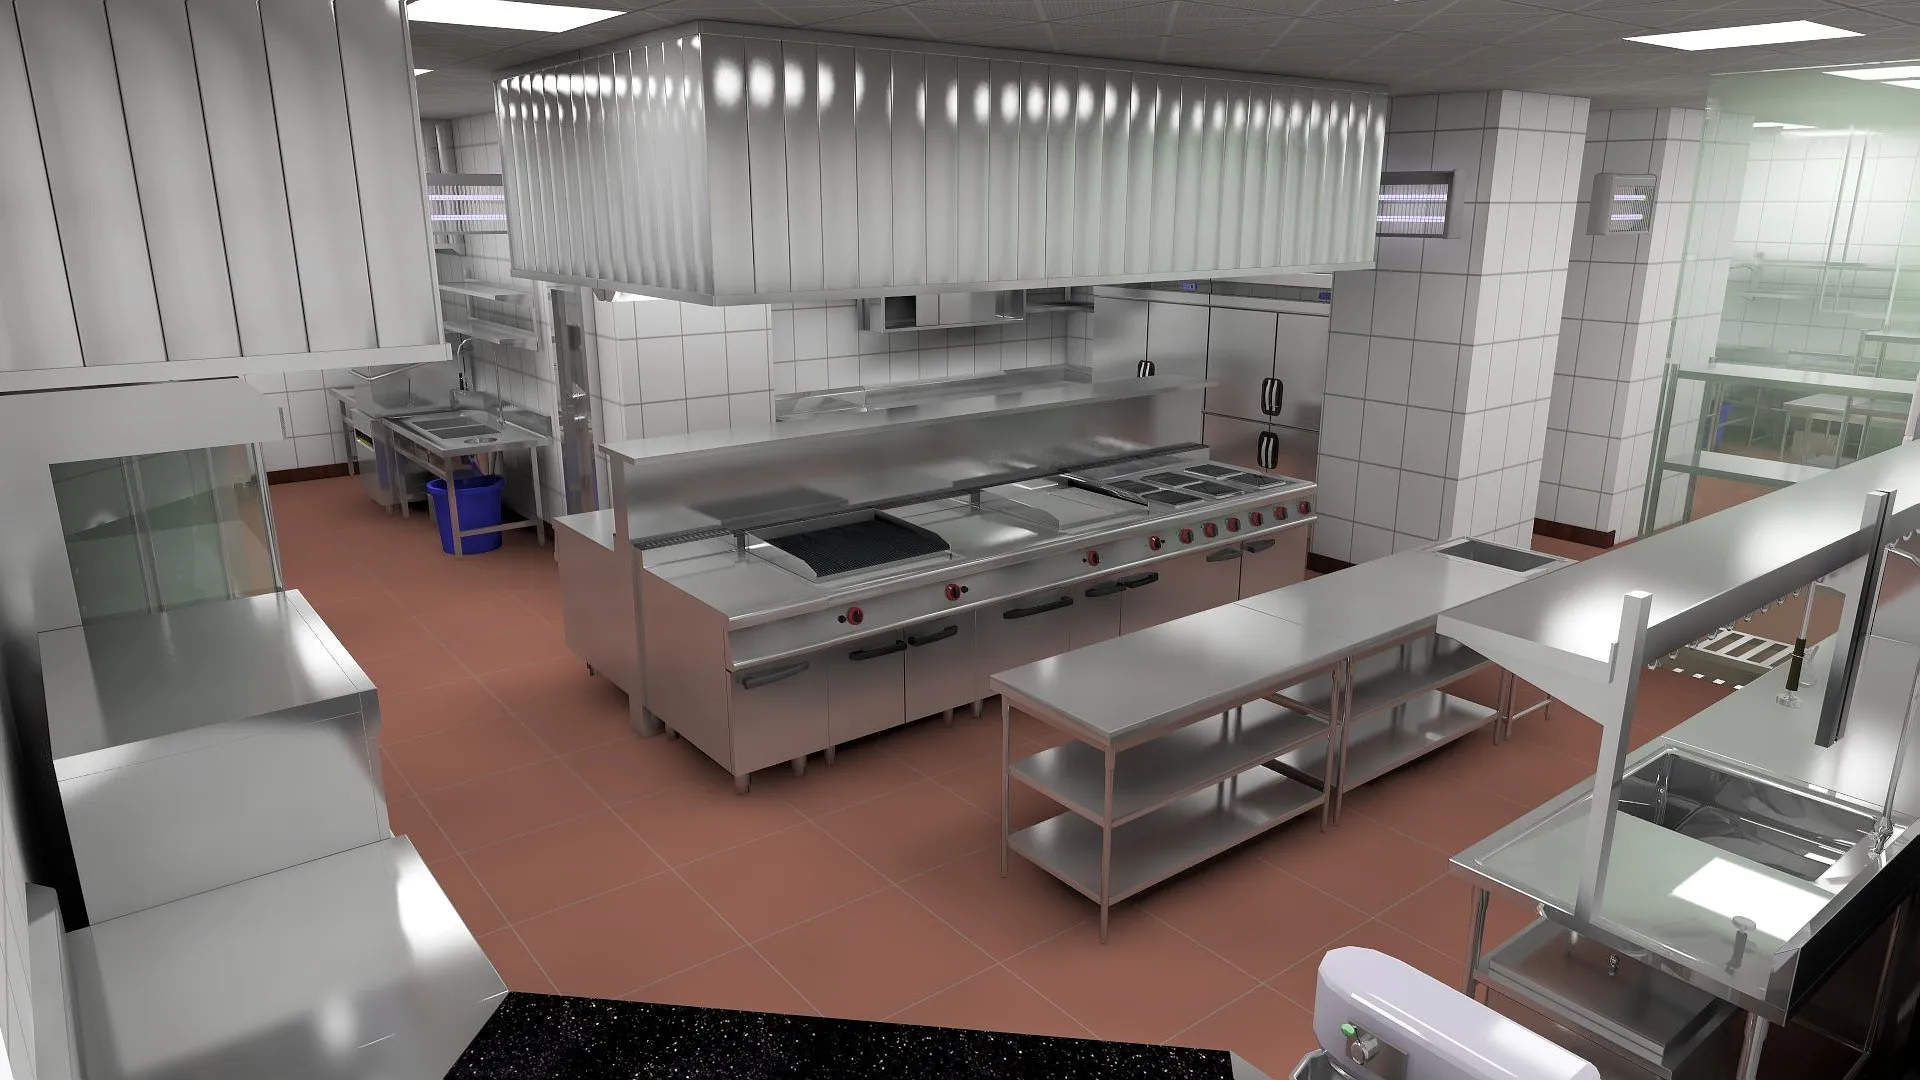 Commercial Kitchens Layout With Commercial Kitchen Equipment Design And 3d Kitchen Design In China Buy Dapur Desain Dapur Komersial Desain Peralatan Dapur Komersial Product On Alibabacom